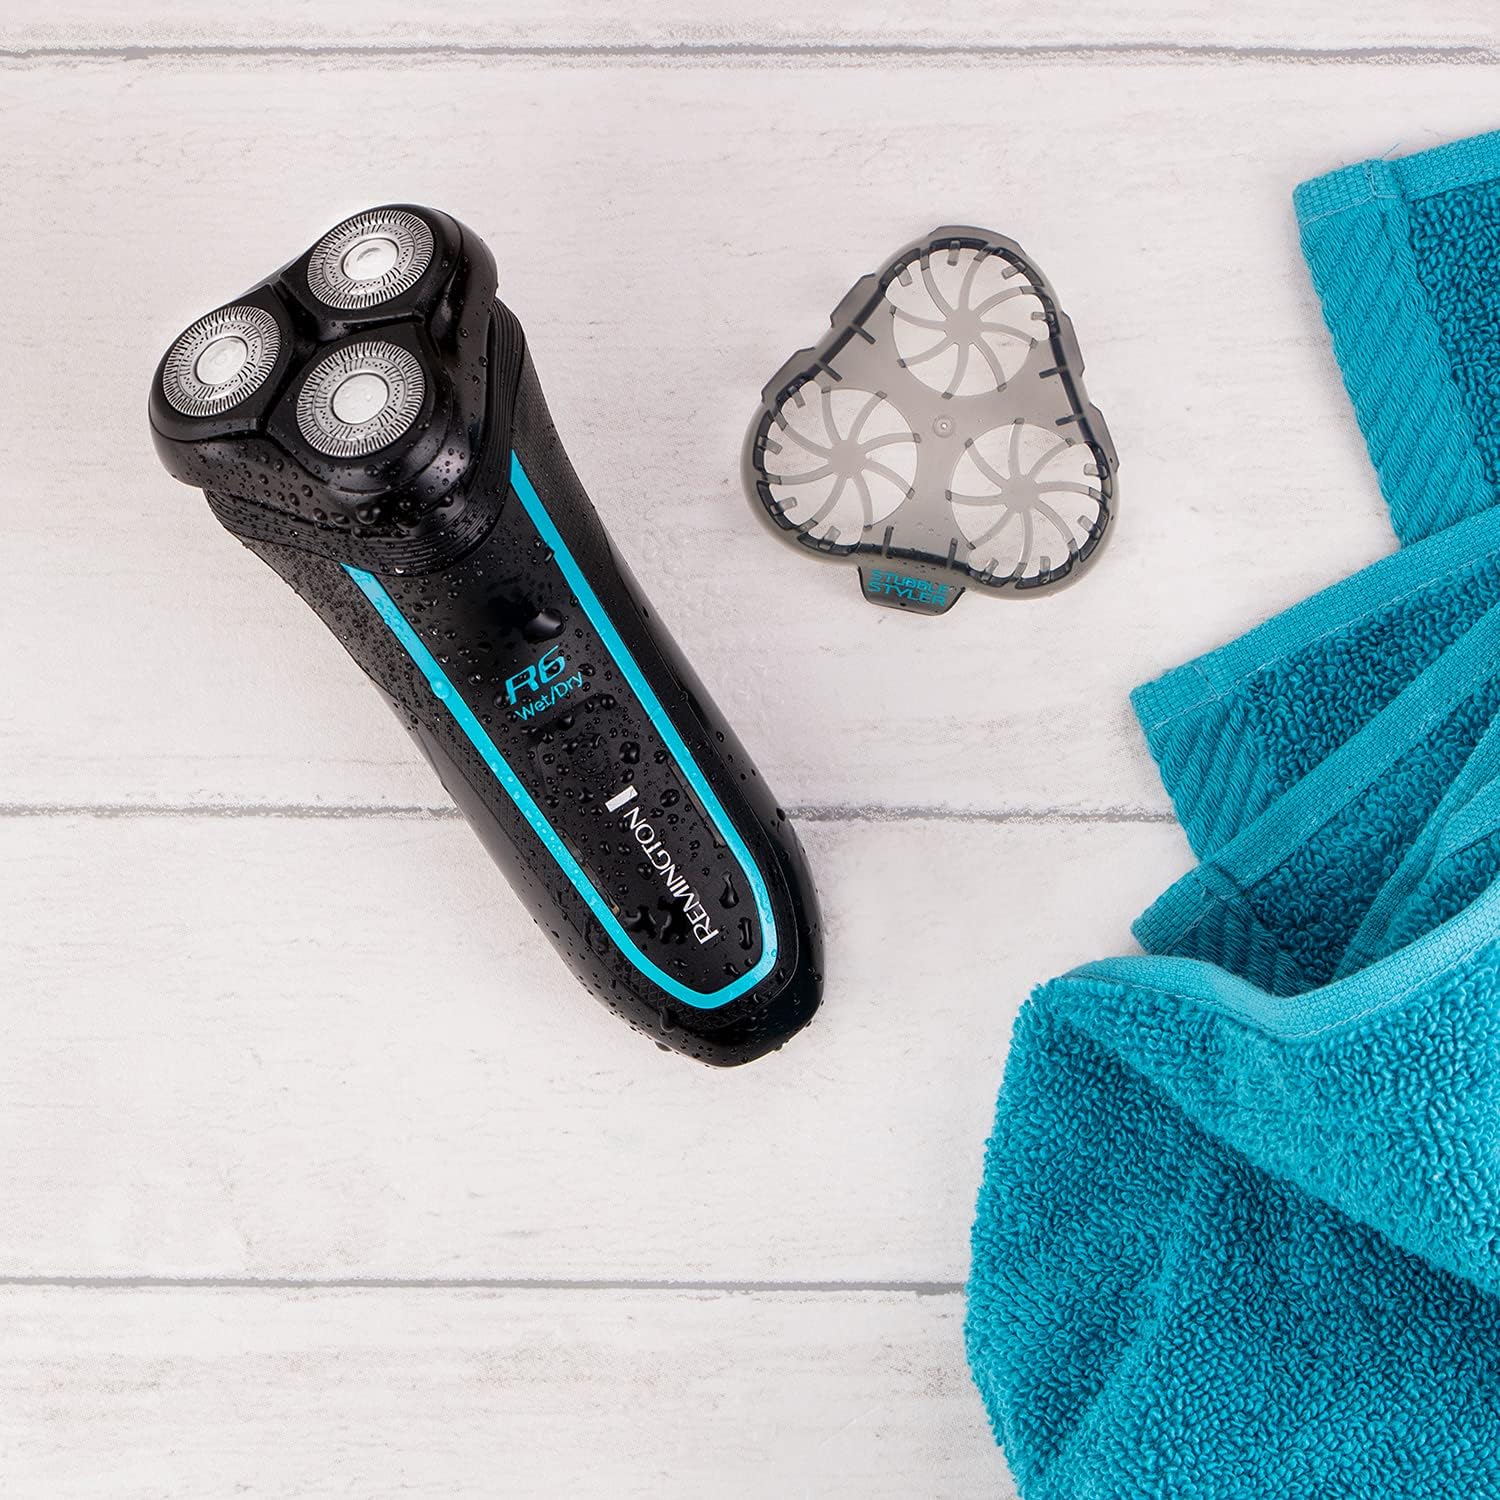 Remington R6 Aqua Wet & Dry Mens Electric Rotary Shaver (100% Waterproof, Pop up trimmer, 60min usage, 90min charge, 5min Quick charge, Cordless, USB Charging, Travel pouch) R6000